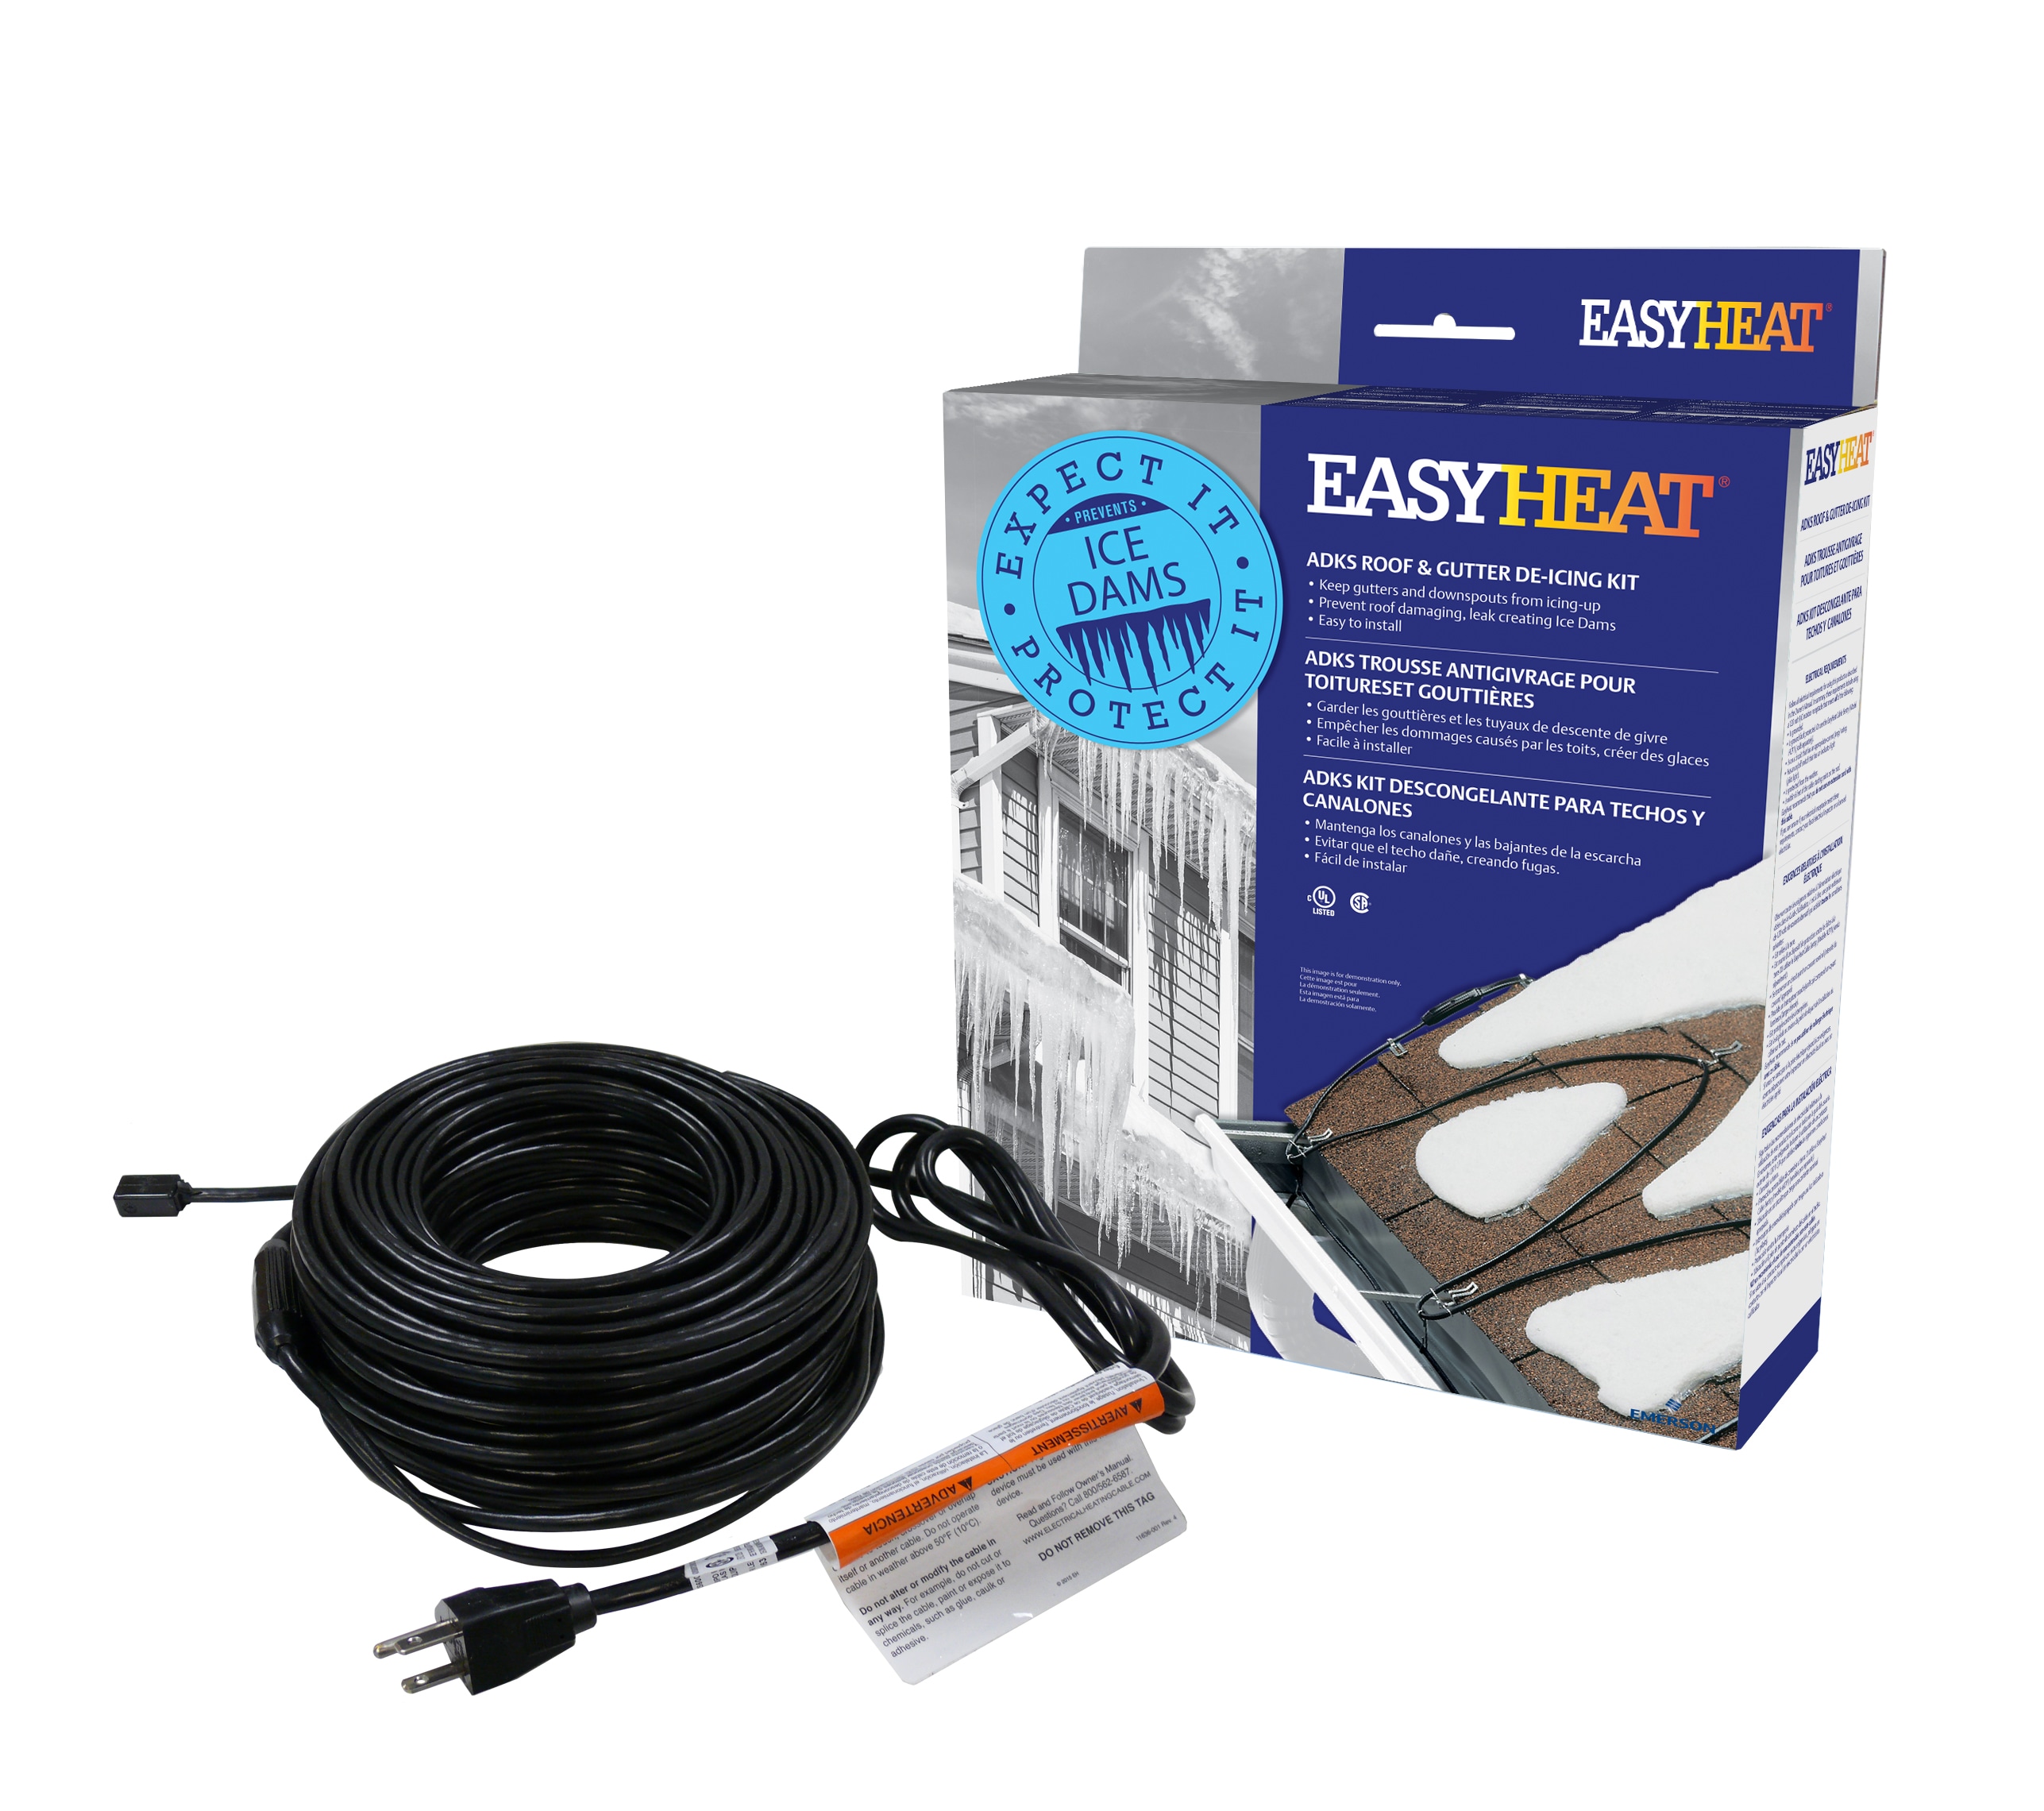 EASYHEAT Easy Heat Automatic Control - 1200 w - White RS2